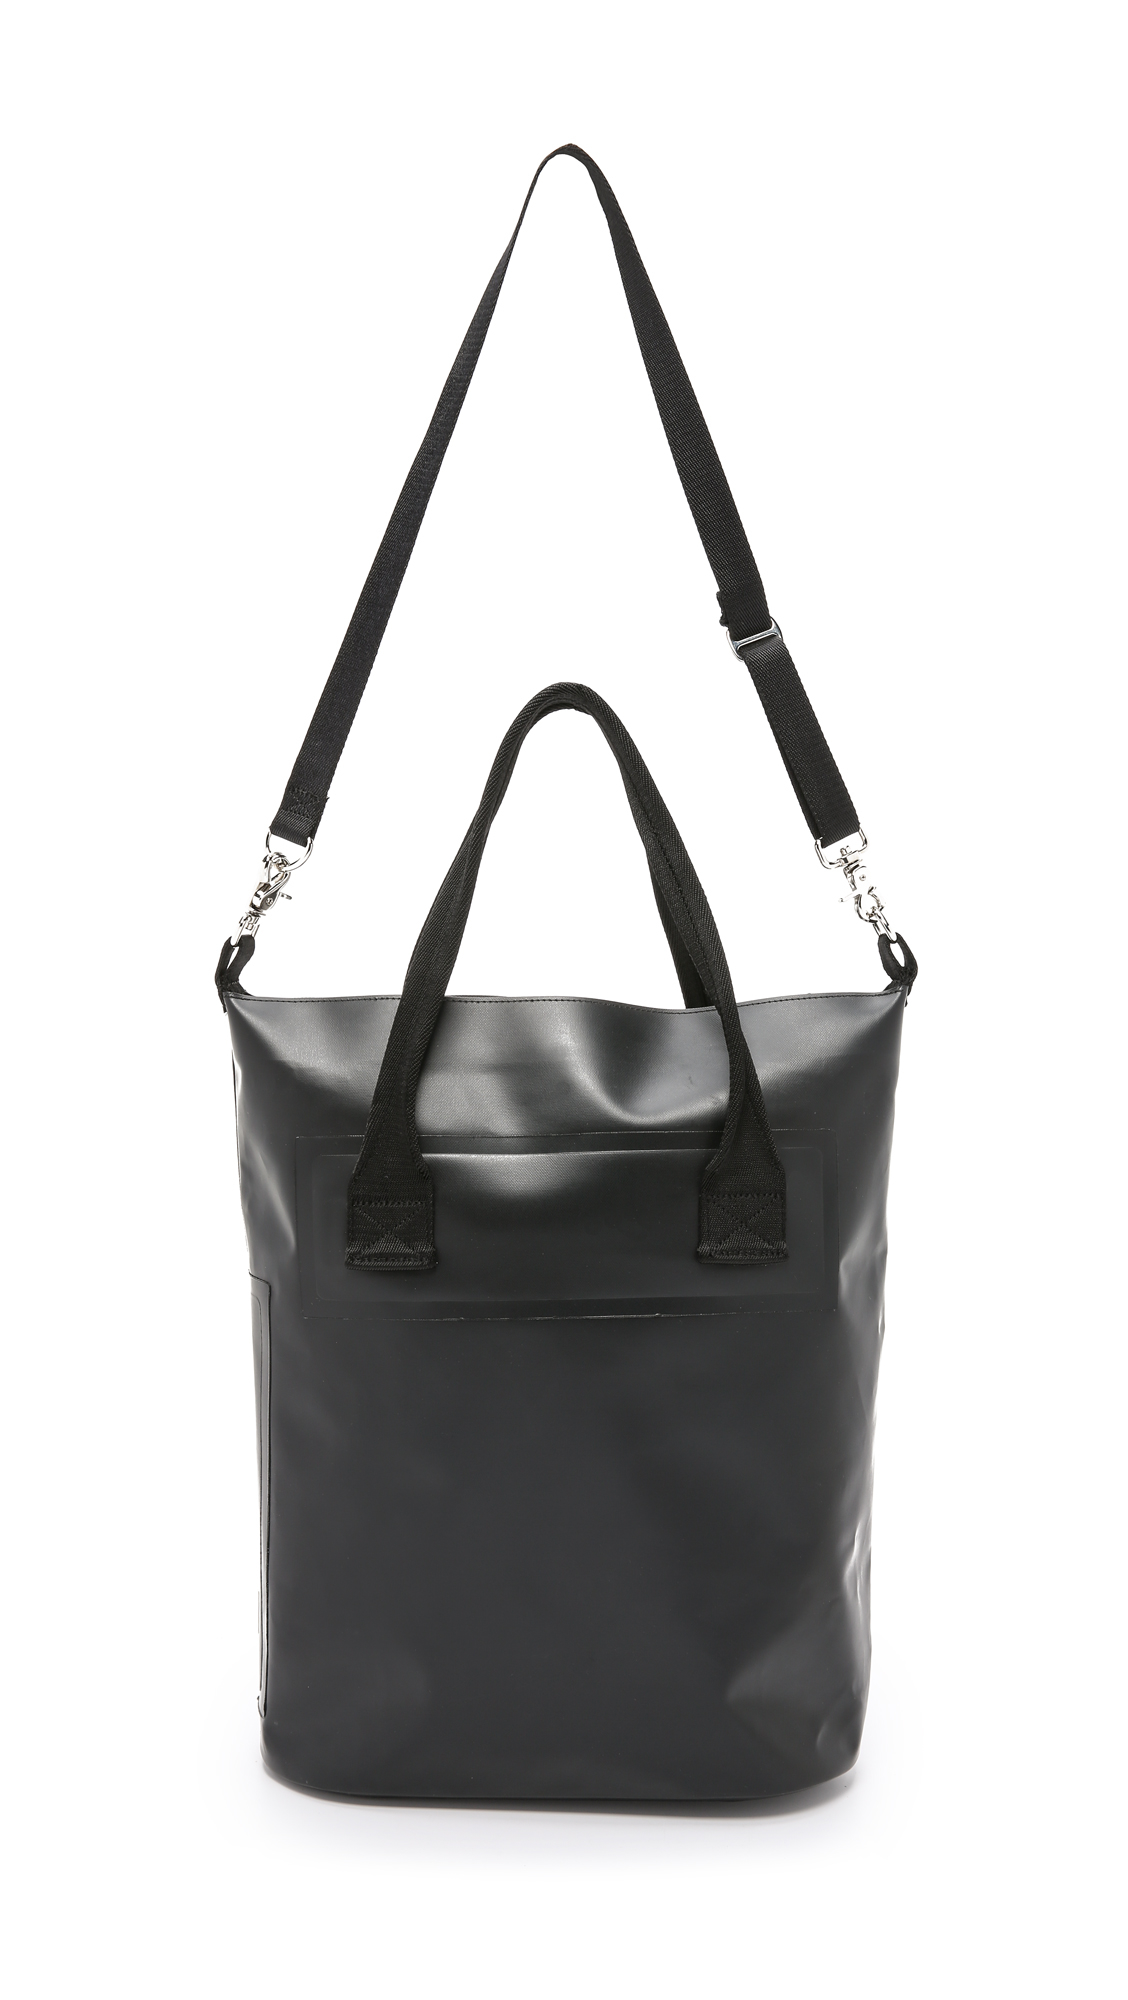 Eytys Canvas Void Tote in Black for Men - Lyst